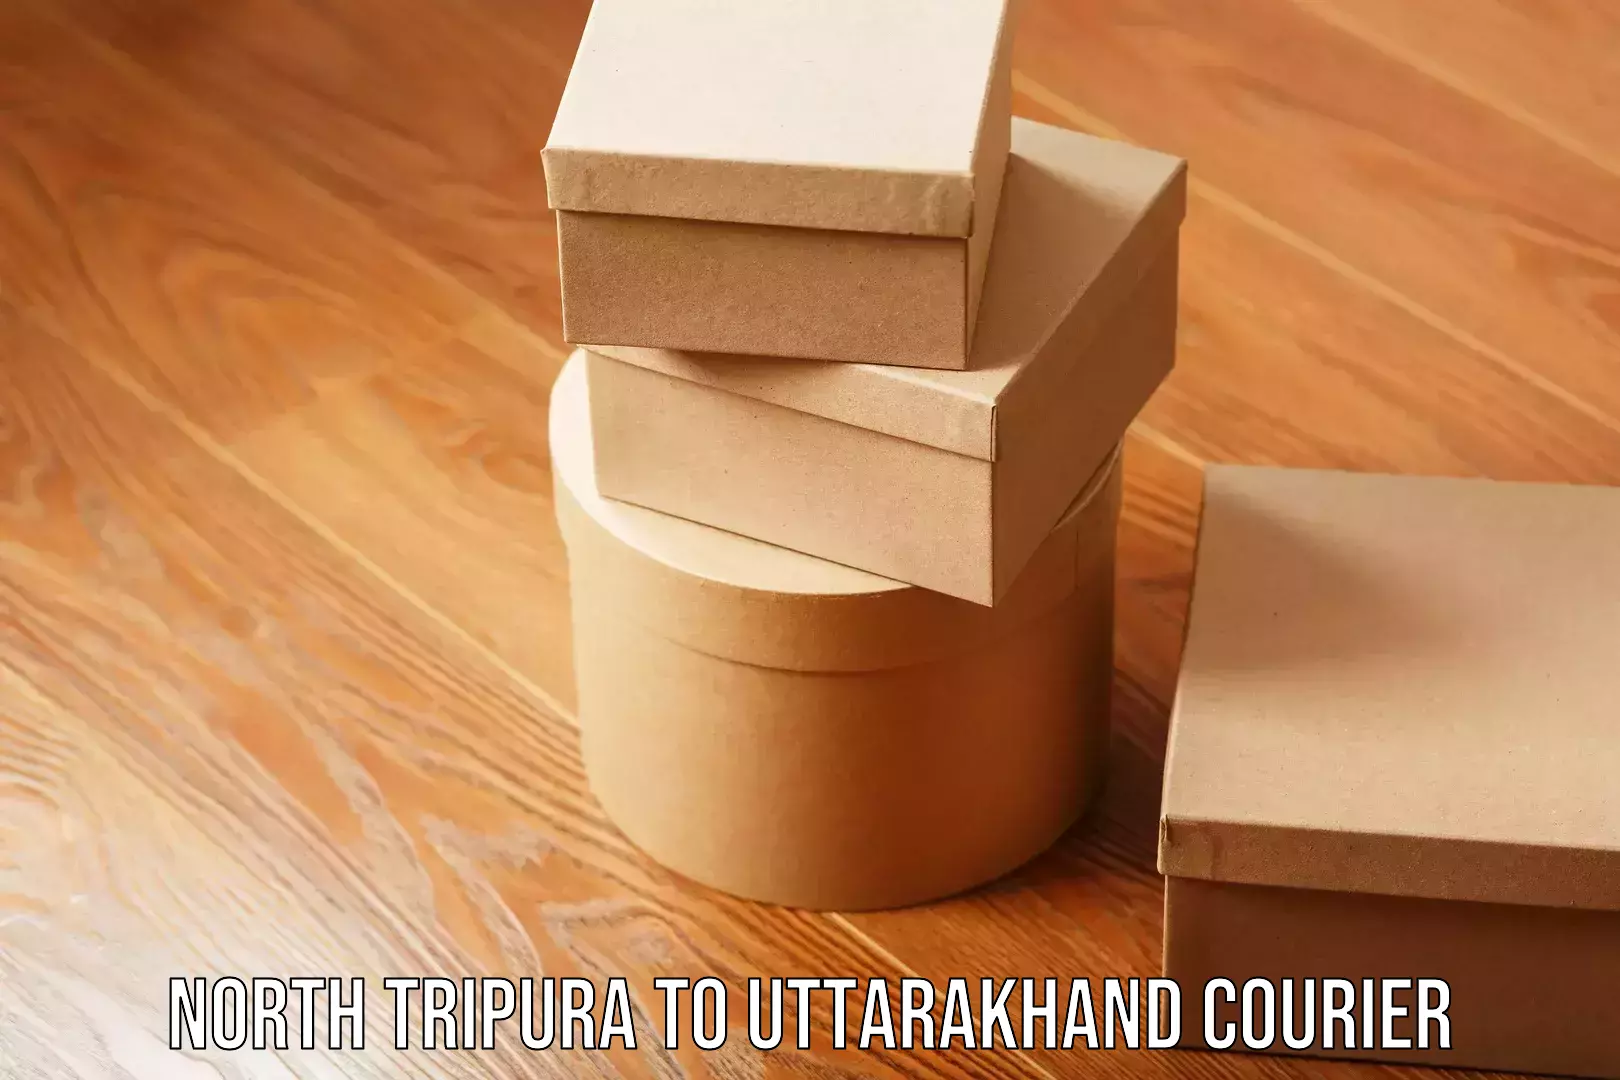 Reliable shipping partners in North Tripura to Uttarakhand